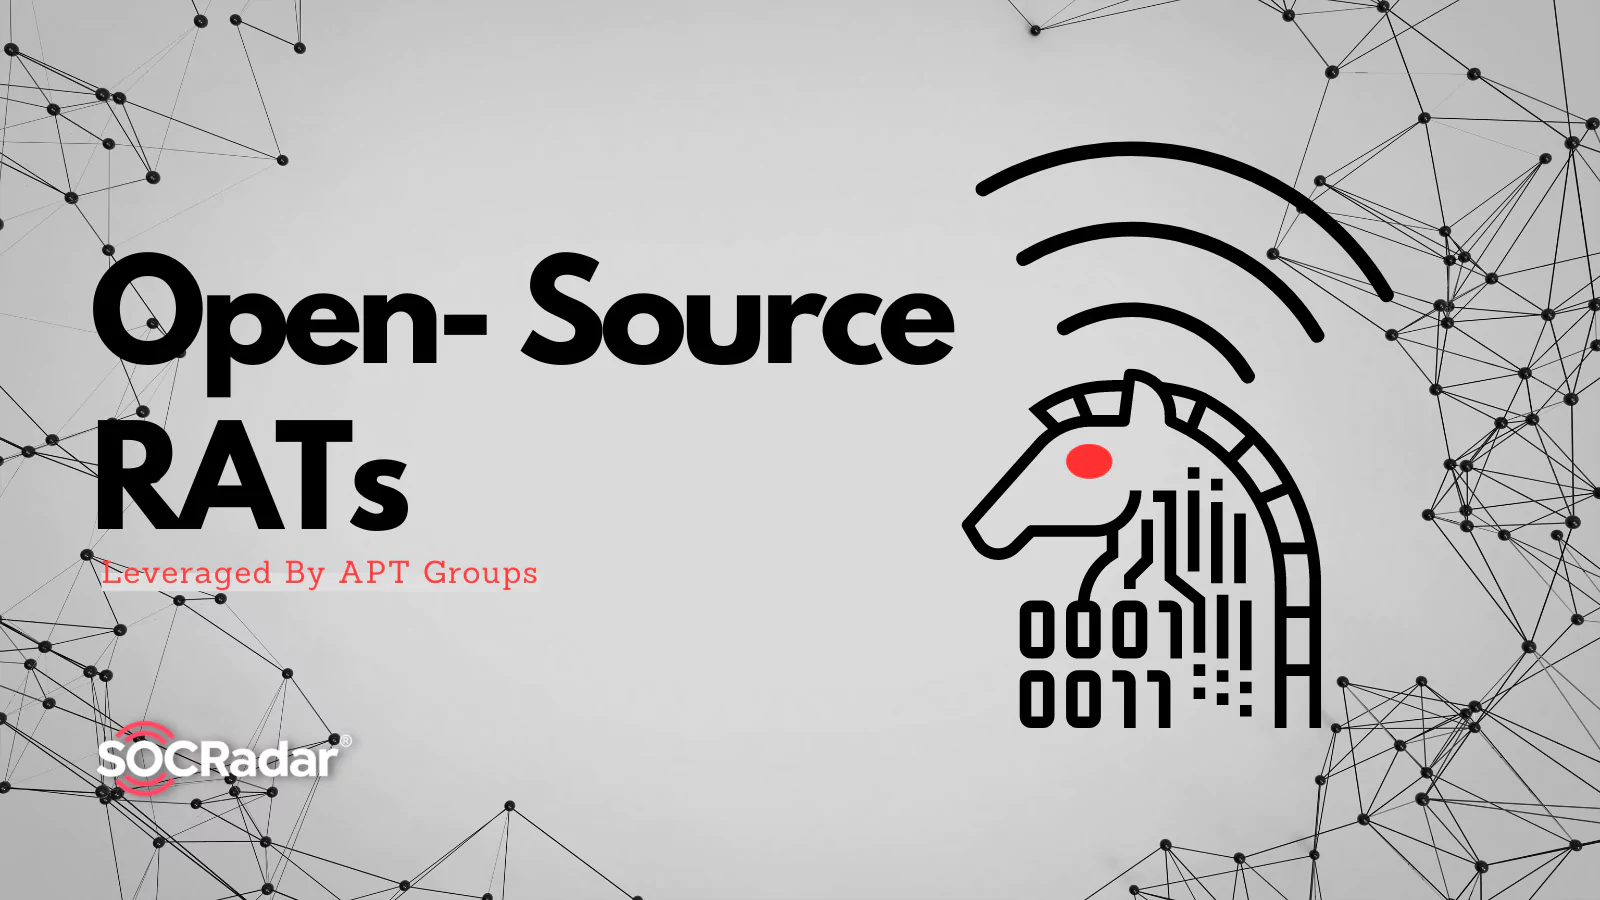 SOCRadar® Cyber Intelligence Inc. | Open-Source RATs Leveraged By APT Groups